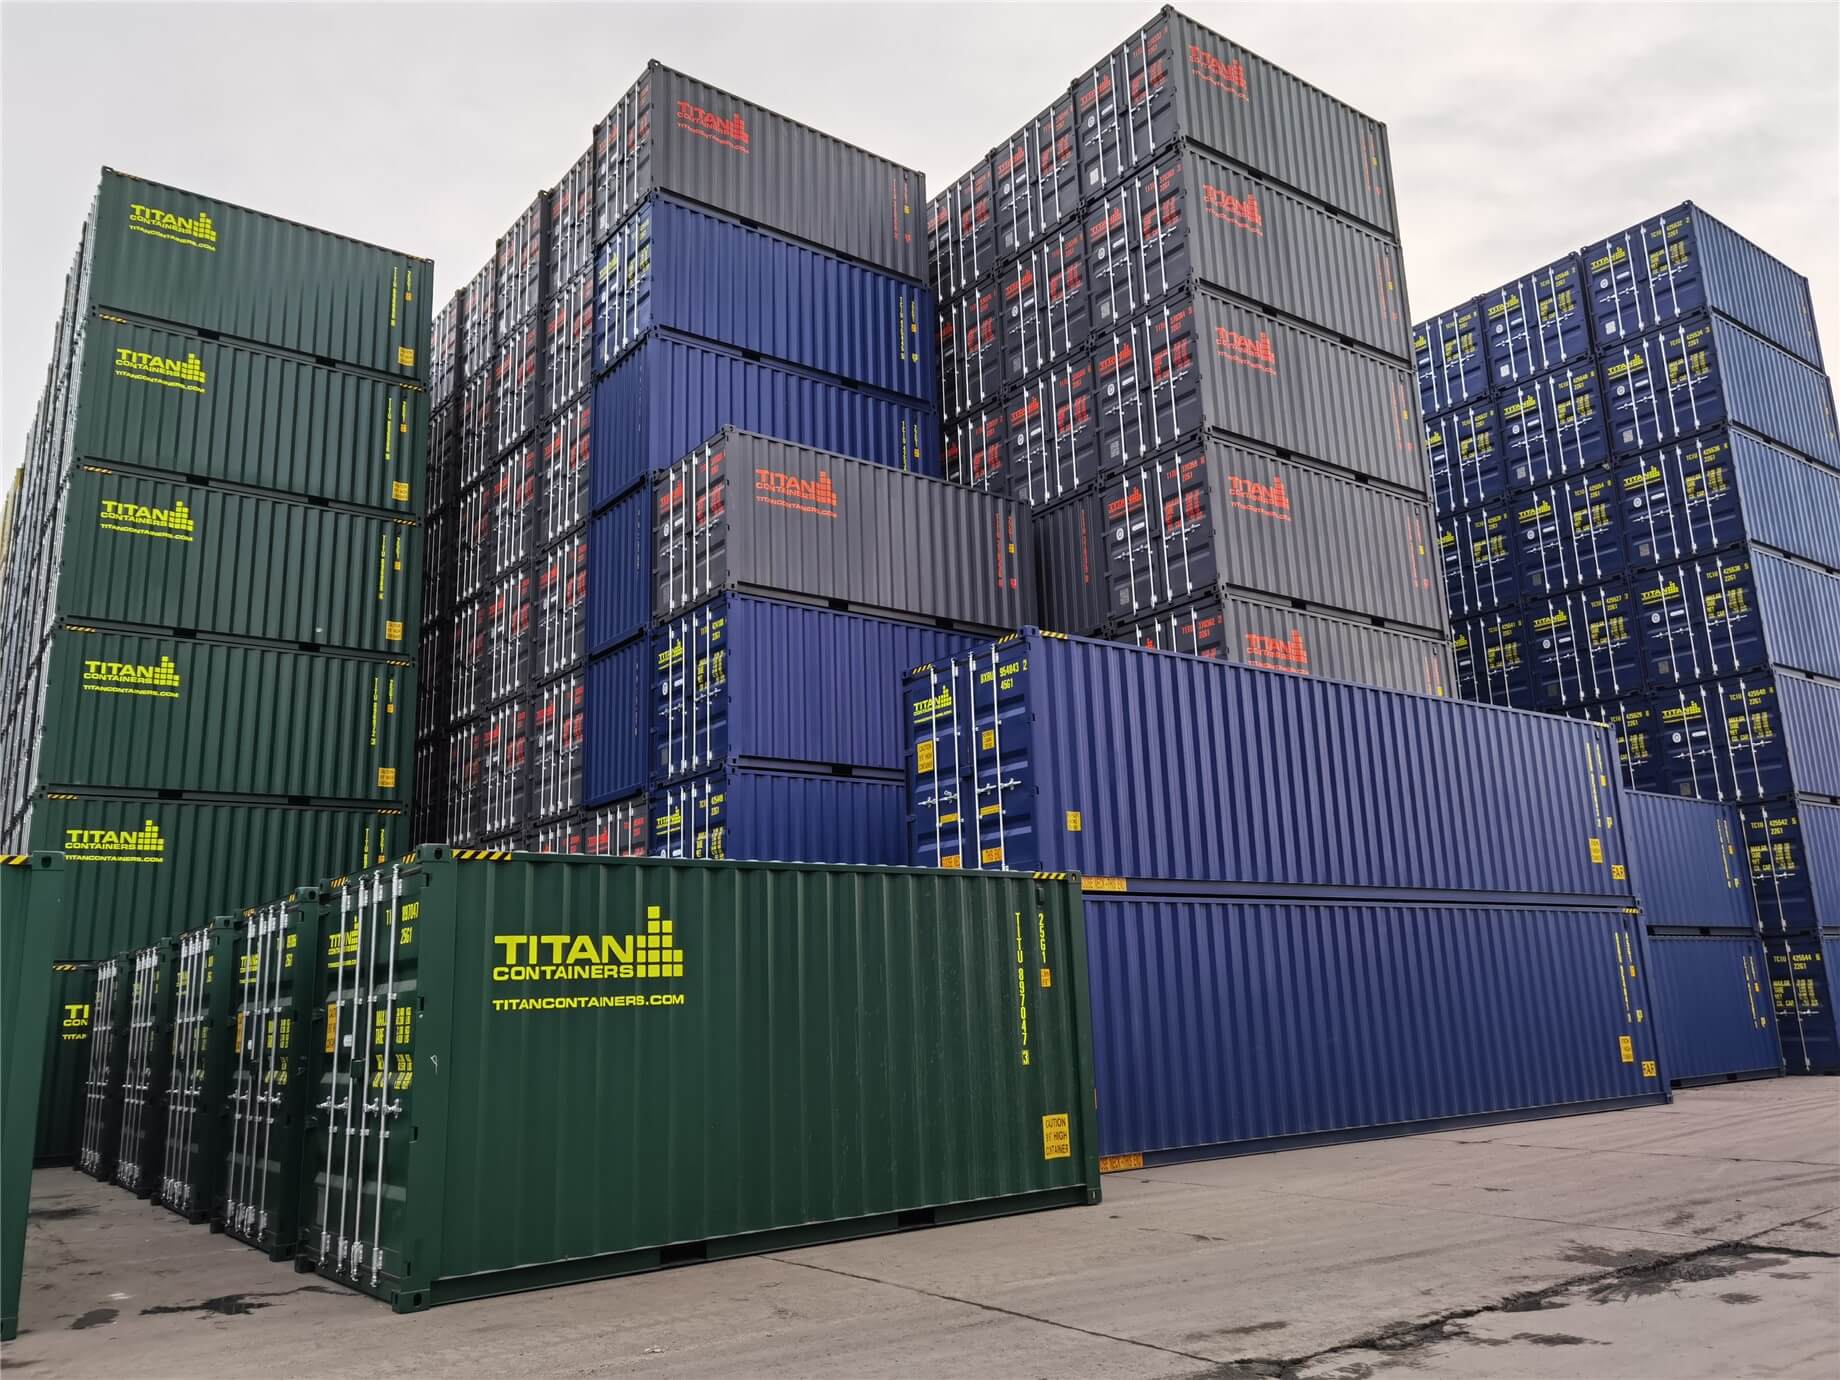 Many Containers in the Port - TITAN Containers